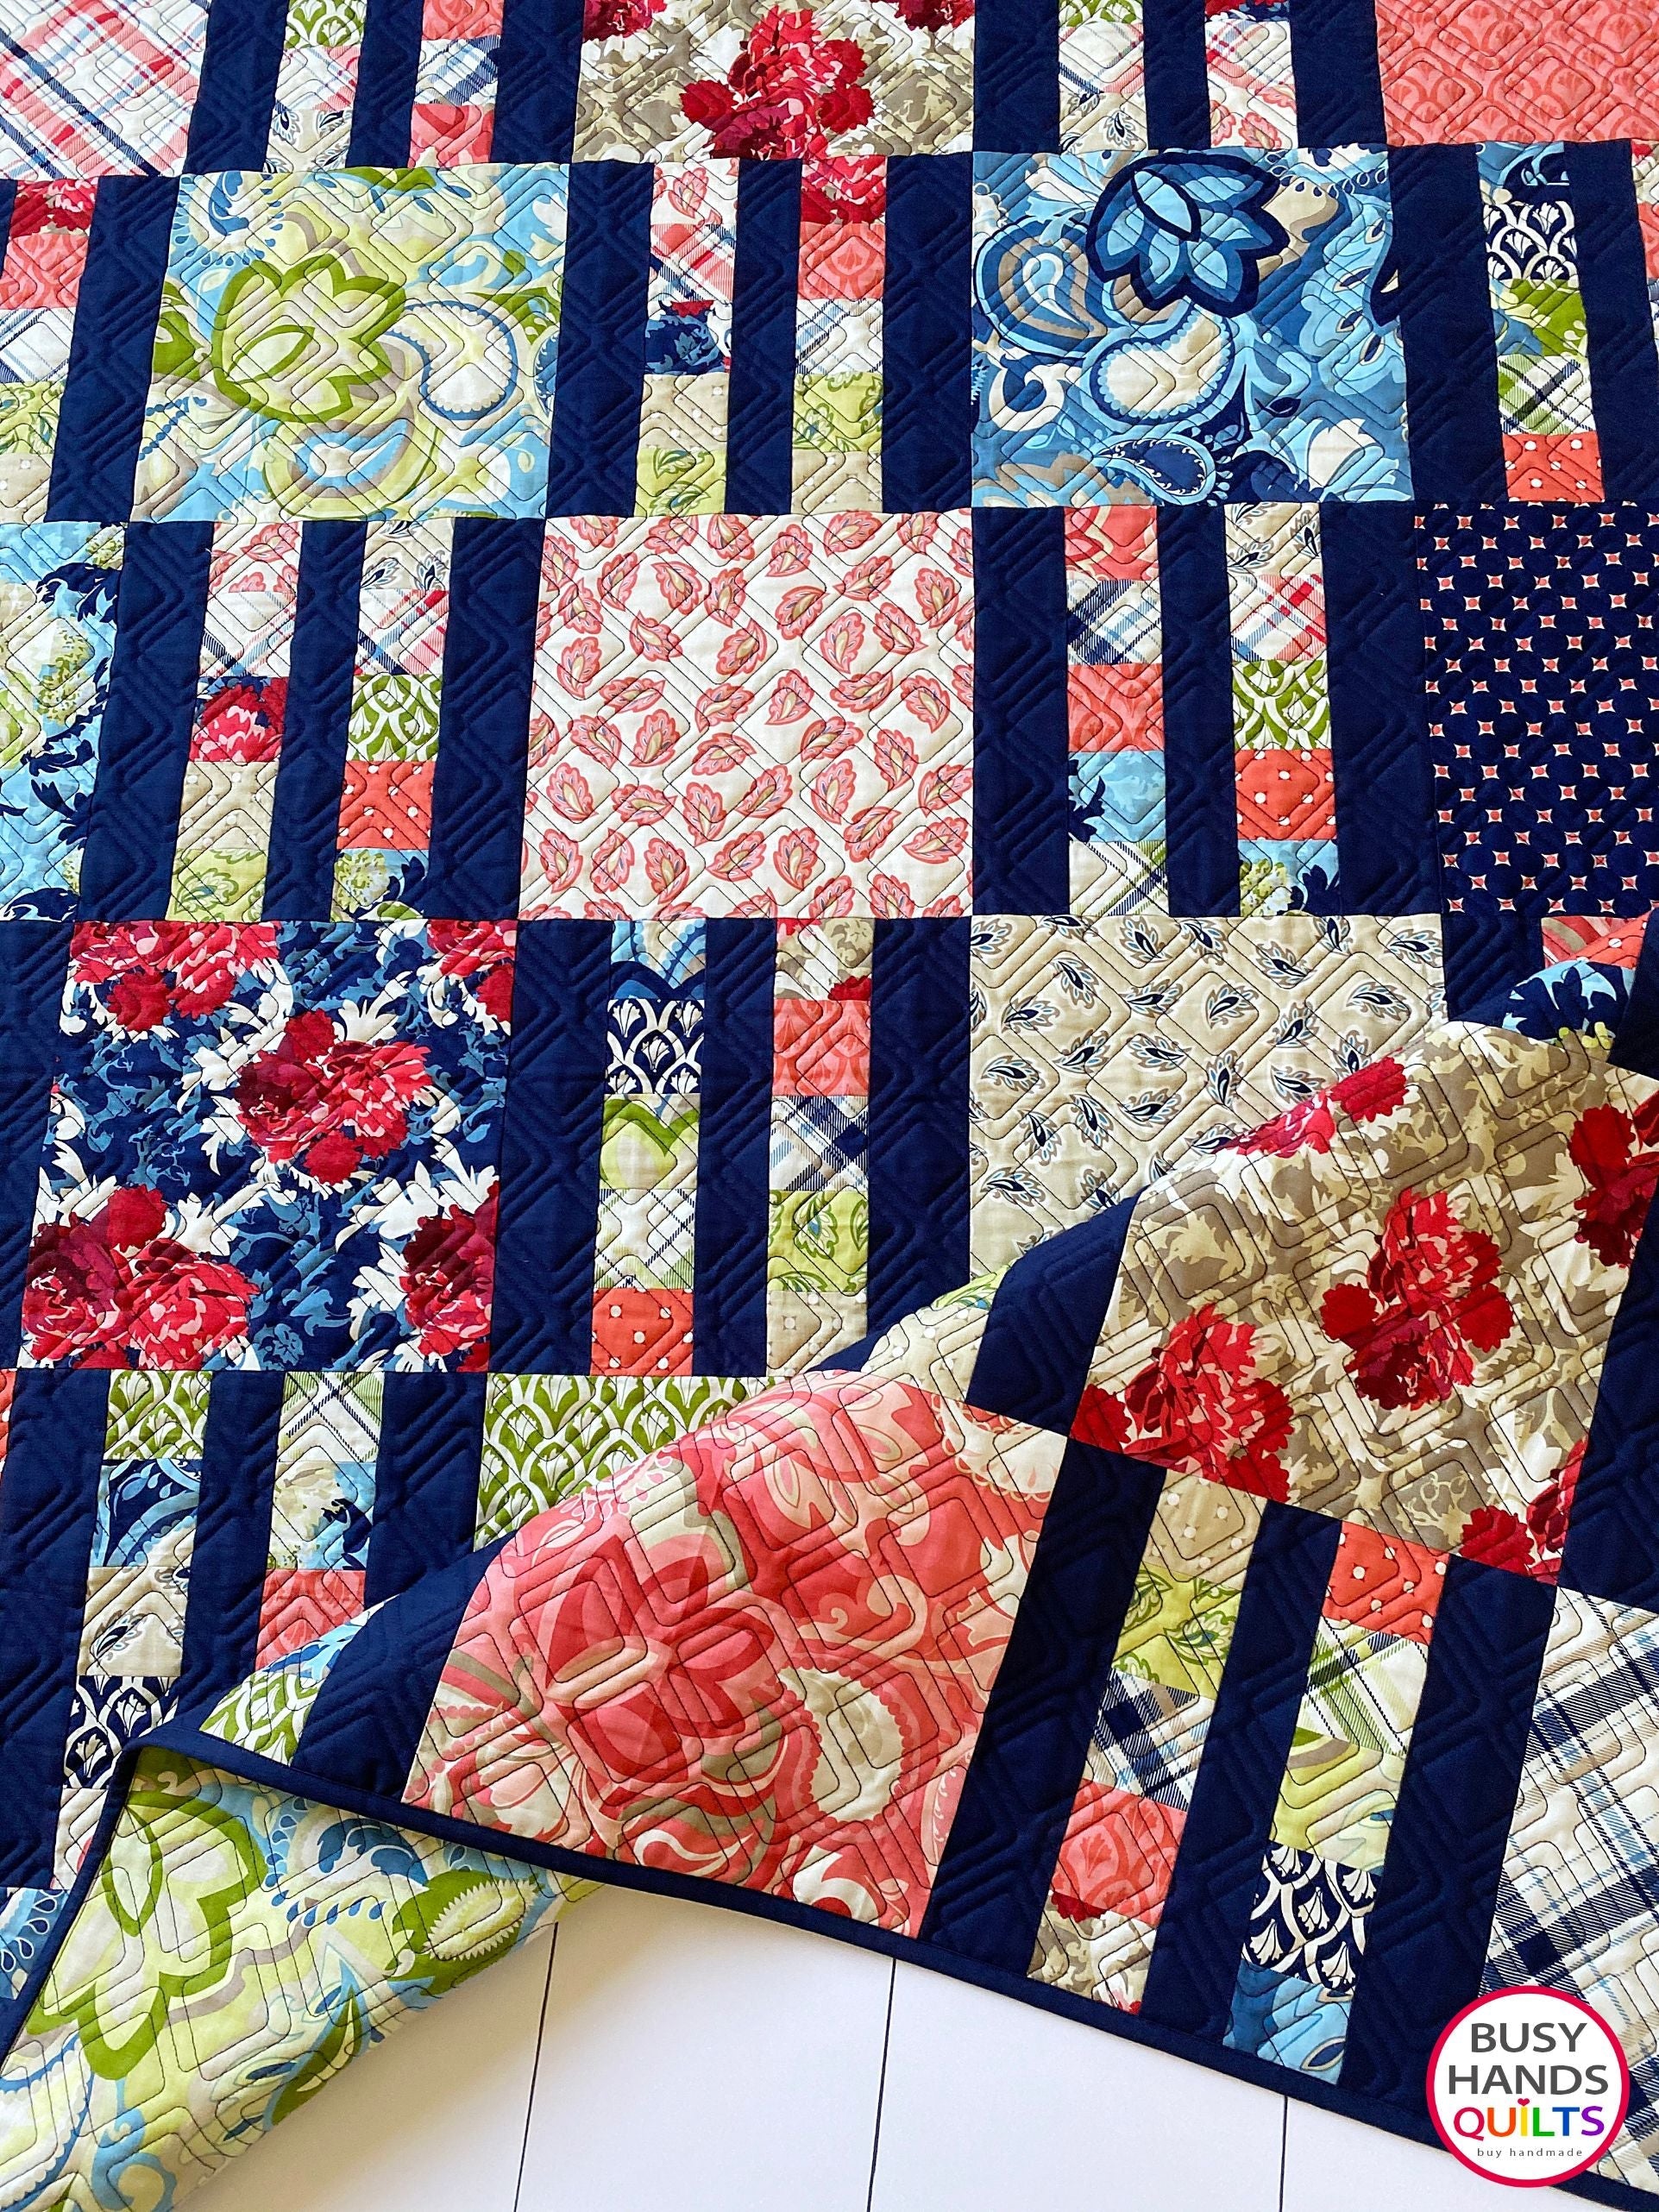 Picket Fence Quilt Pattern PDF DOWNLOAD Busy Hands Quilts $12.99